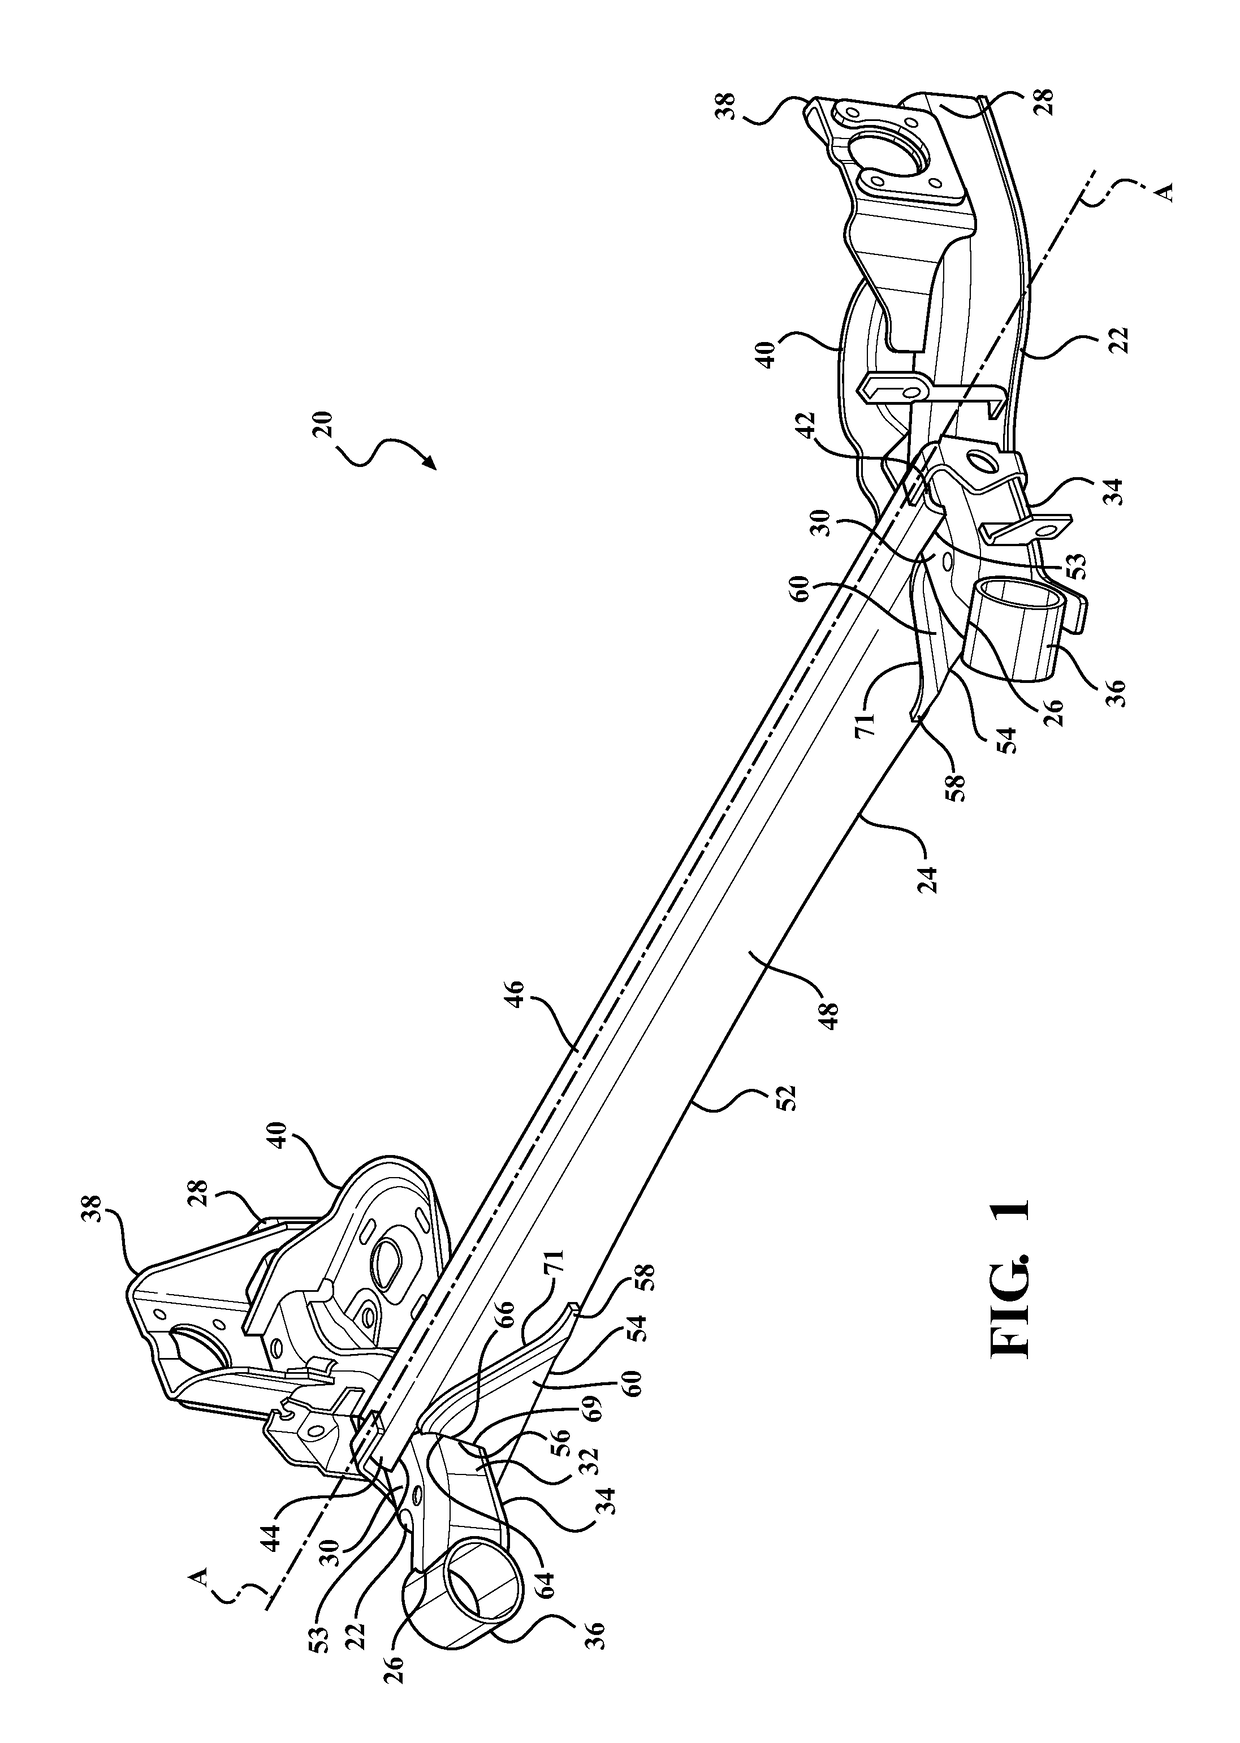 Twist Beam Axle Assembly With Lateral Adjustability